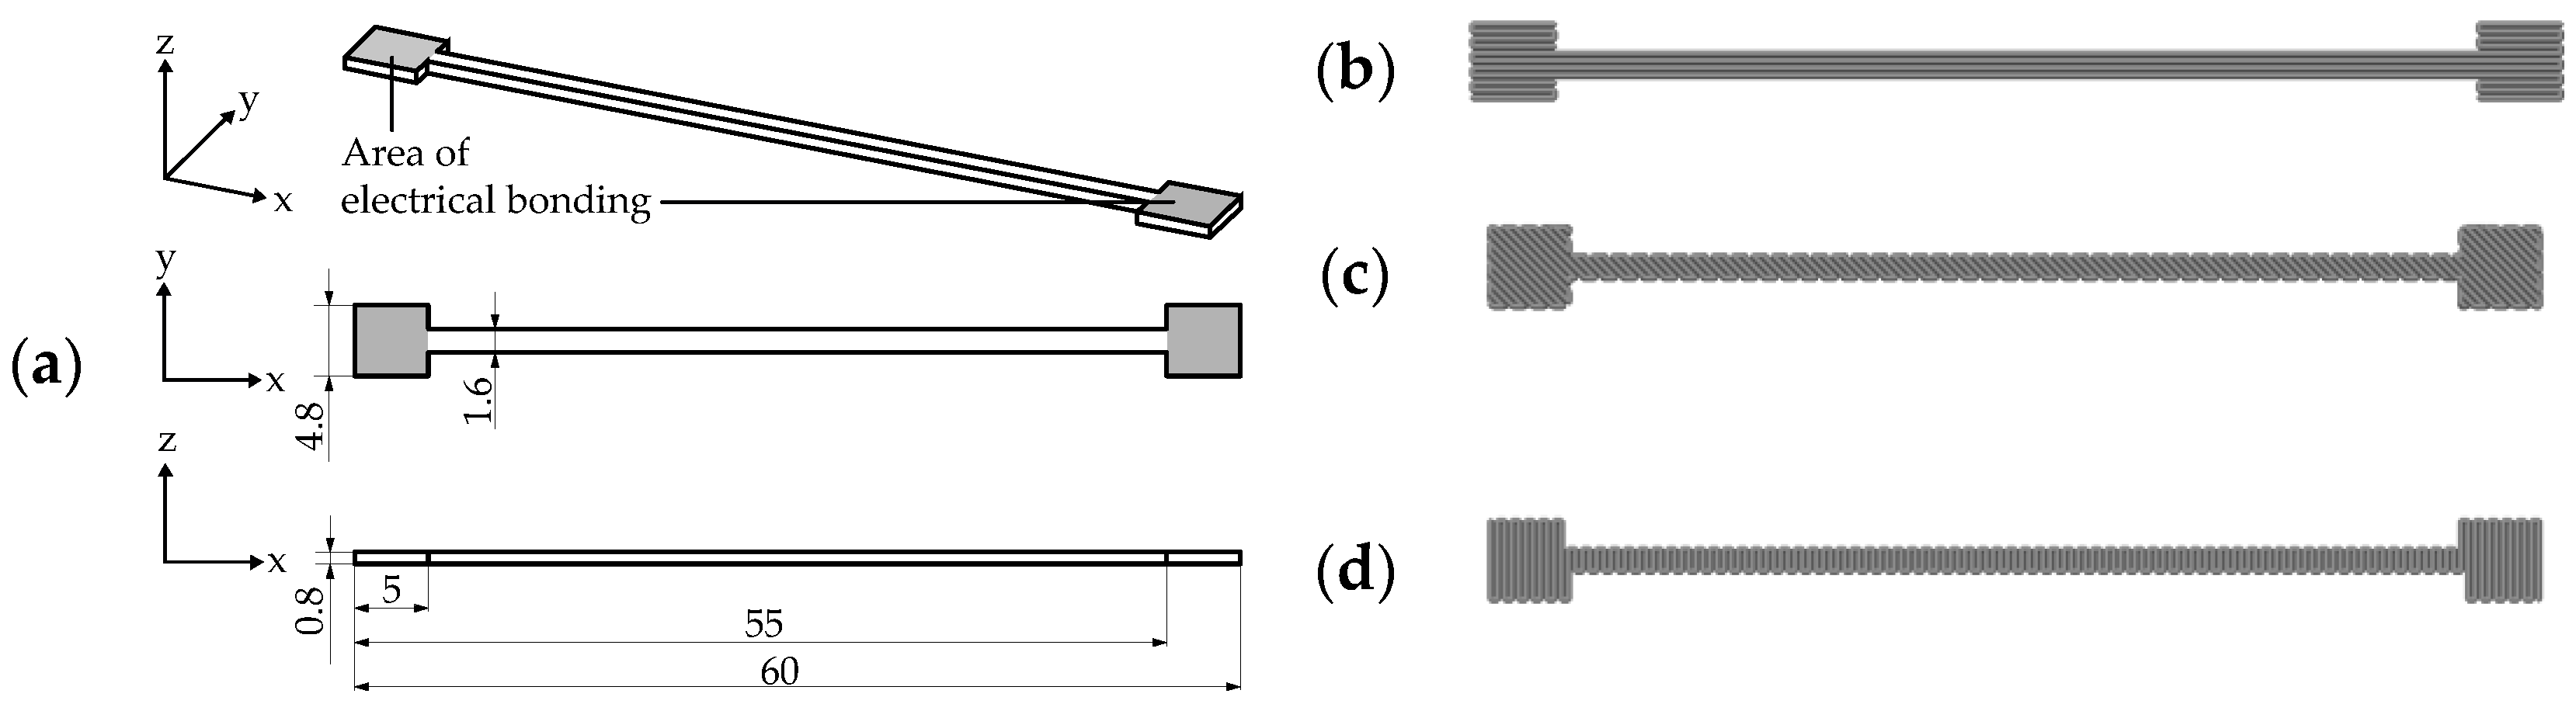 Applied Sciences Free Full Text Design And Characterization Of Electrically Conductive Structures Additively Manufactured By Material Extrusion Html